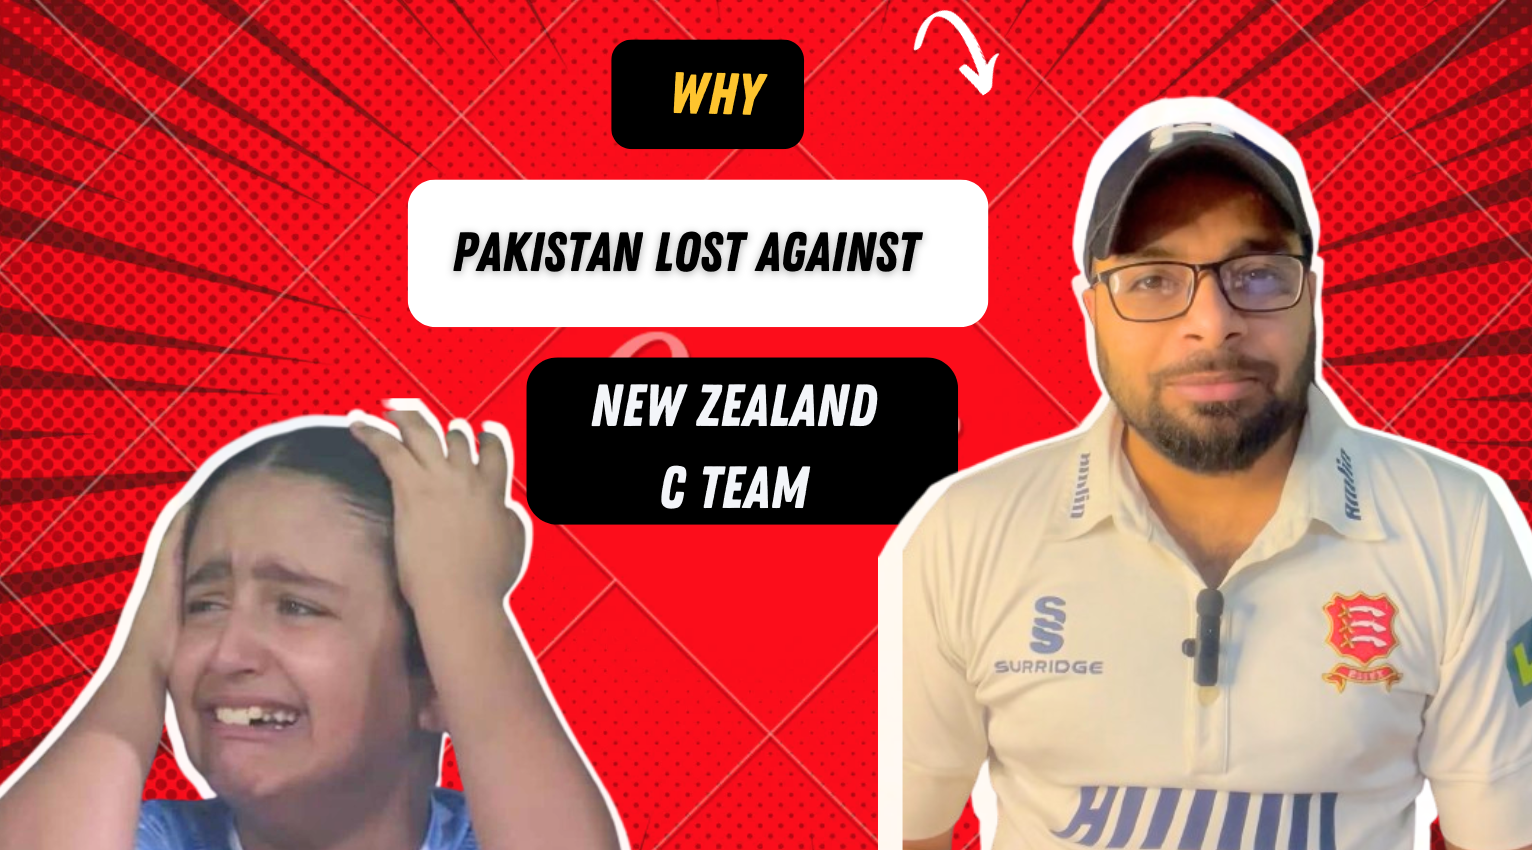 Why Pakistan Lost against New Zealand C Team